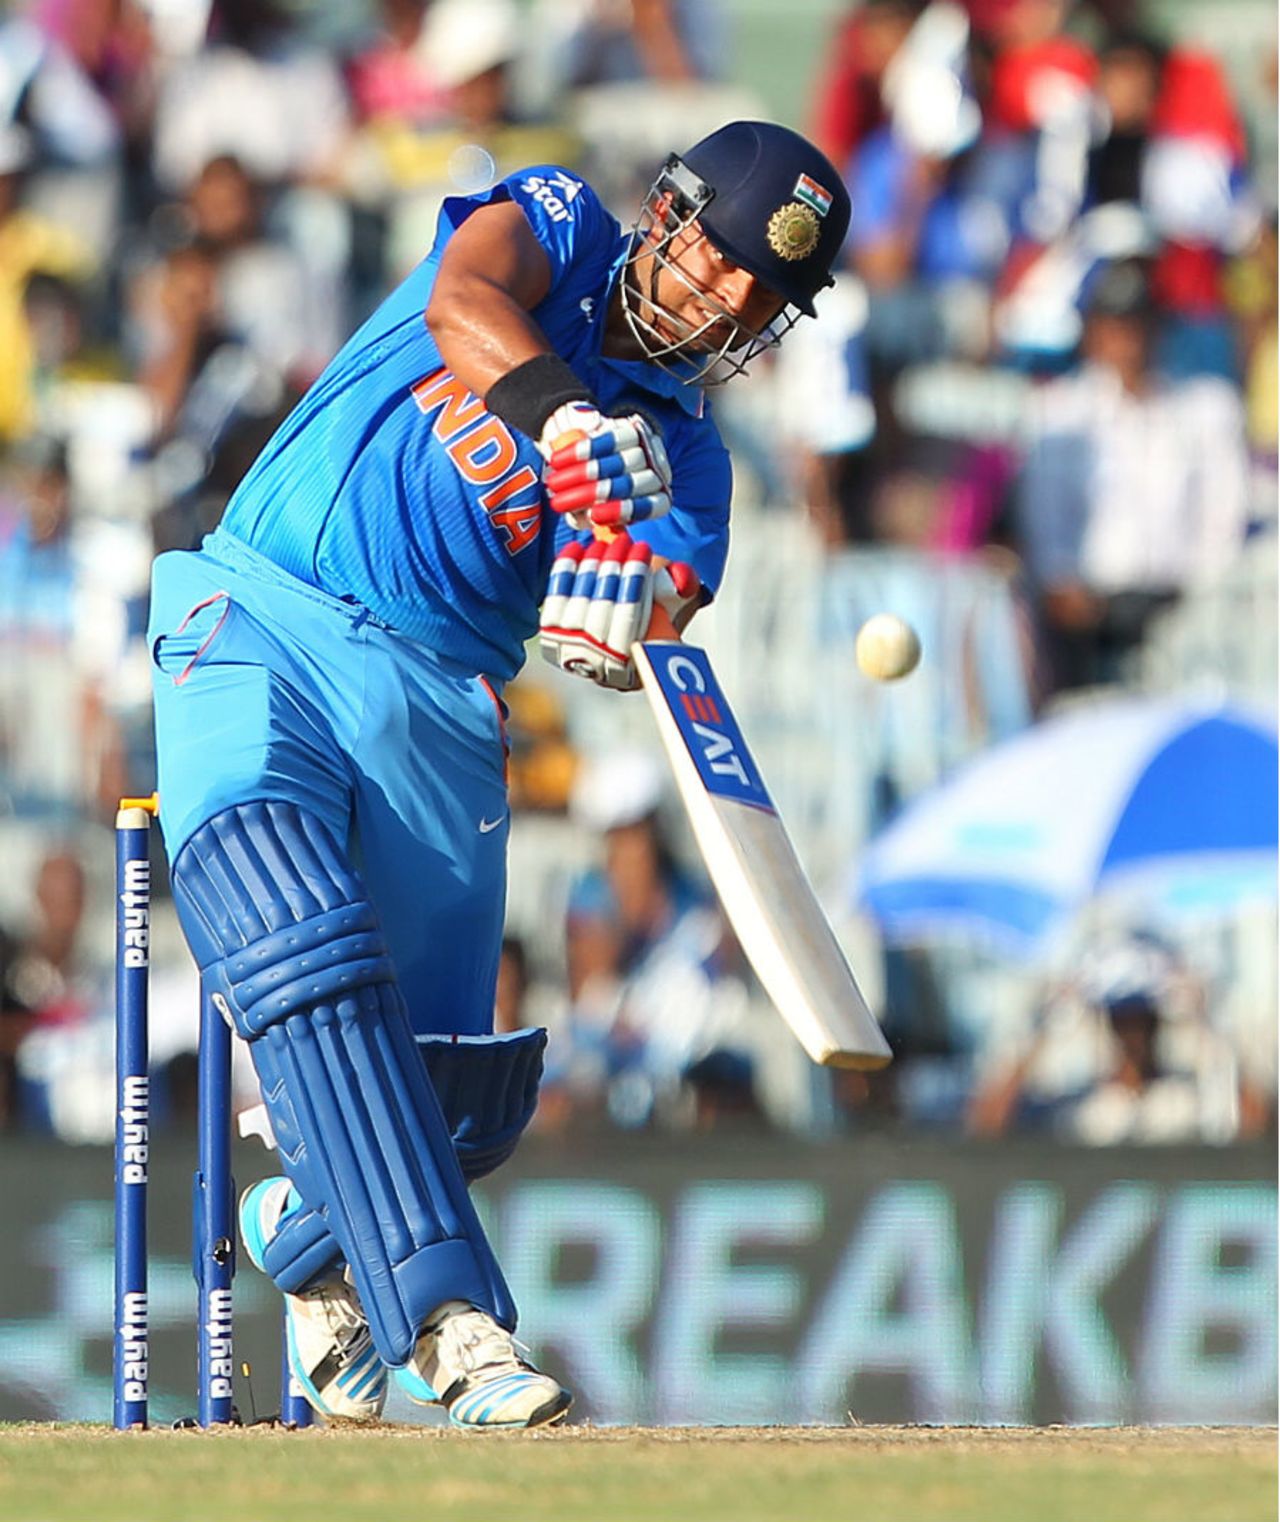 Suresh Raina launches it over the bowler's head, India v South Africa, 4th ODI, Chennai, October 22, 2015